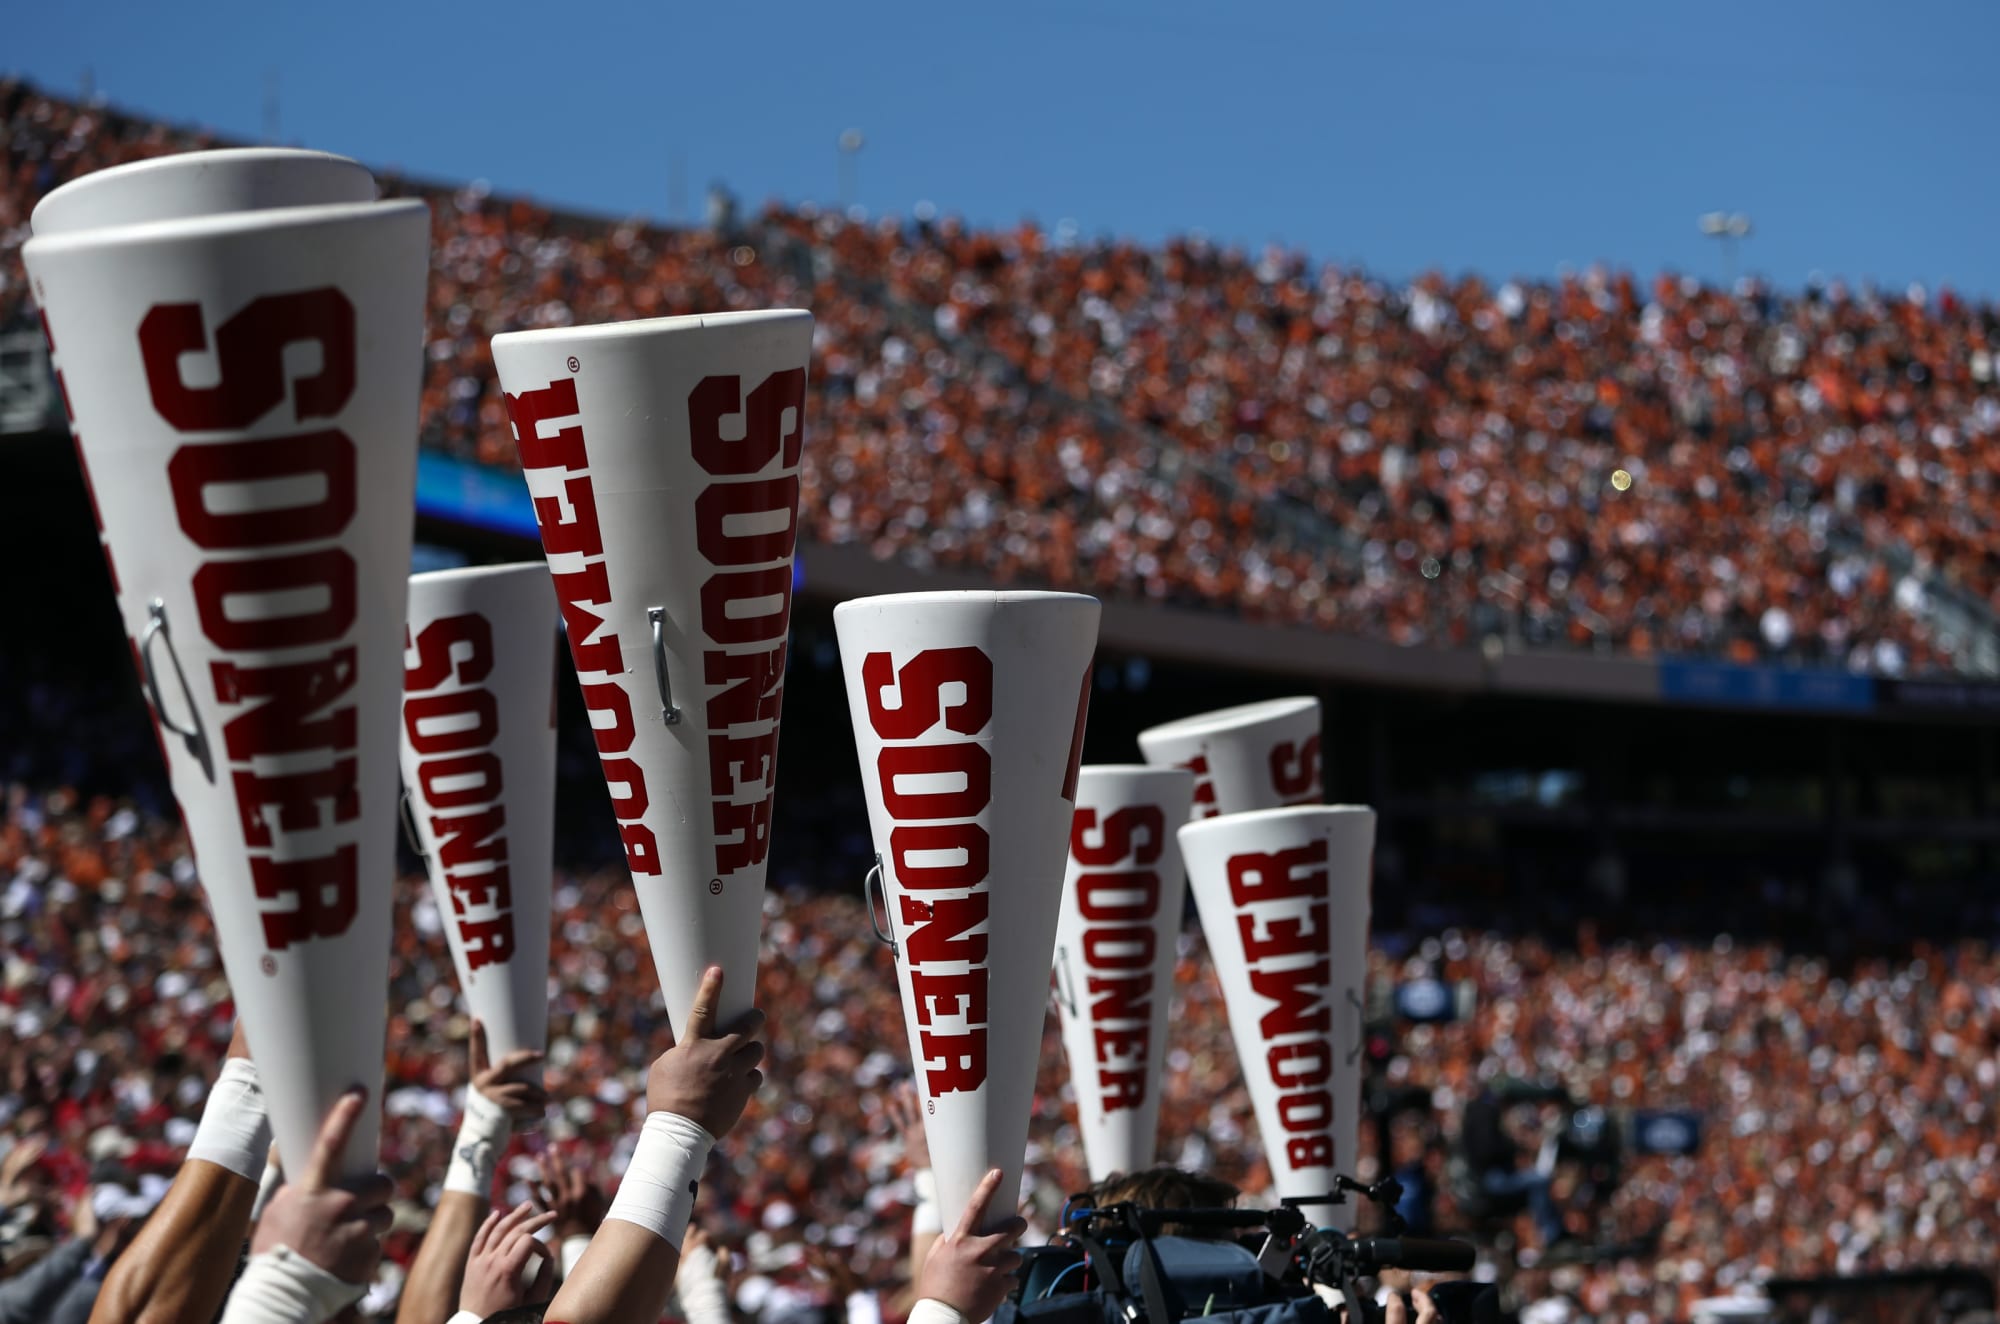  Oklahoma football: Sooner 2023 recruiting slowed, fighting to hold on 